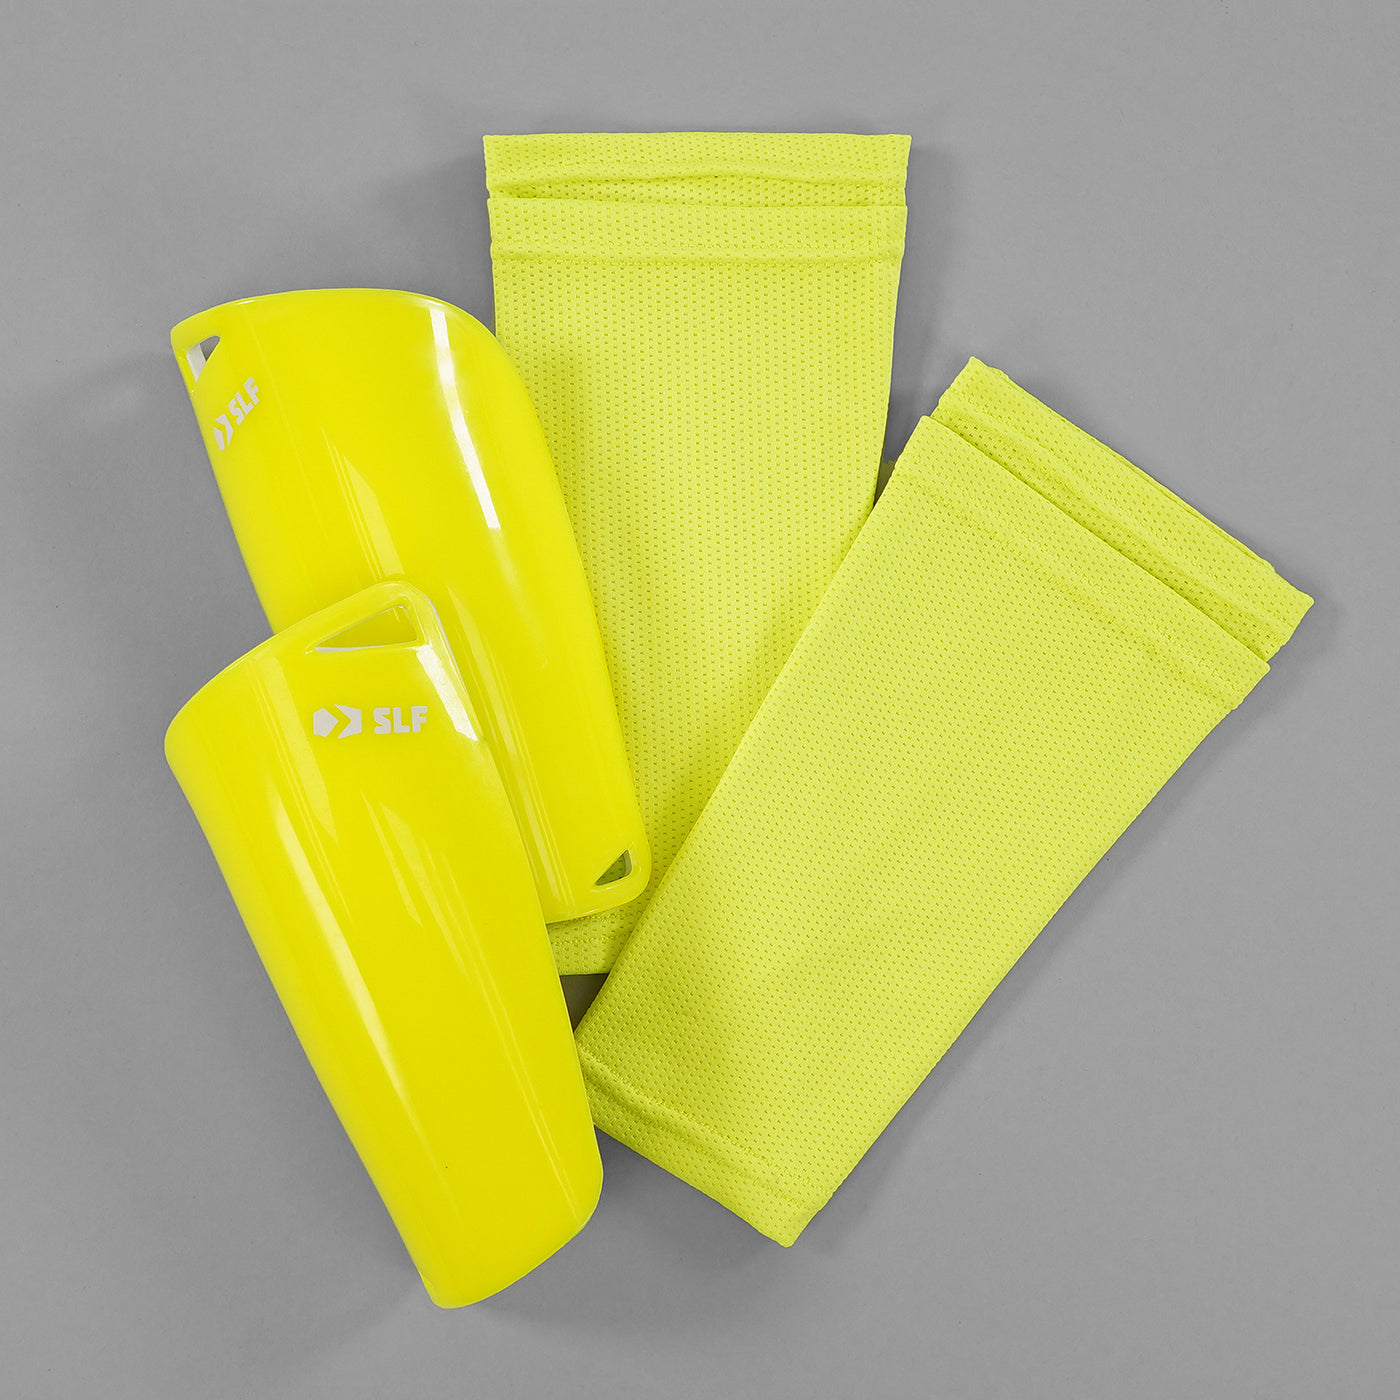 Safety Yellow Soccer Shin Guards